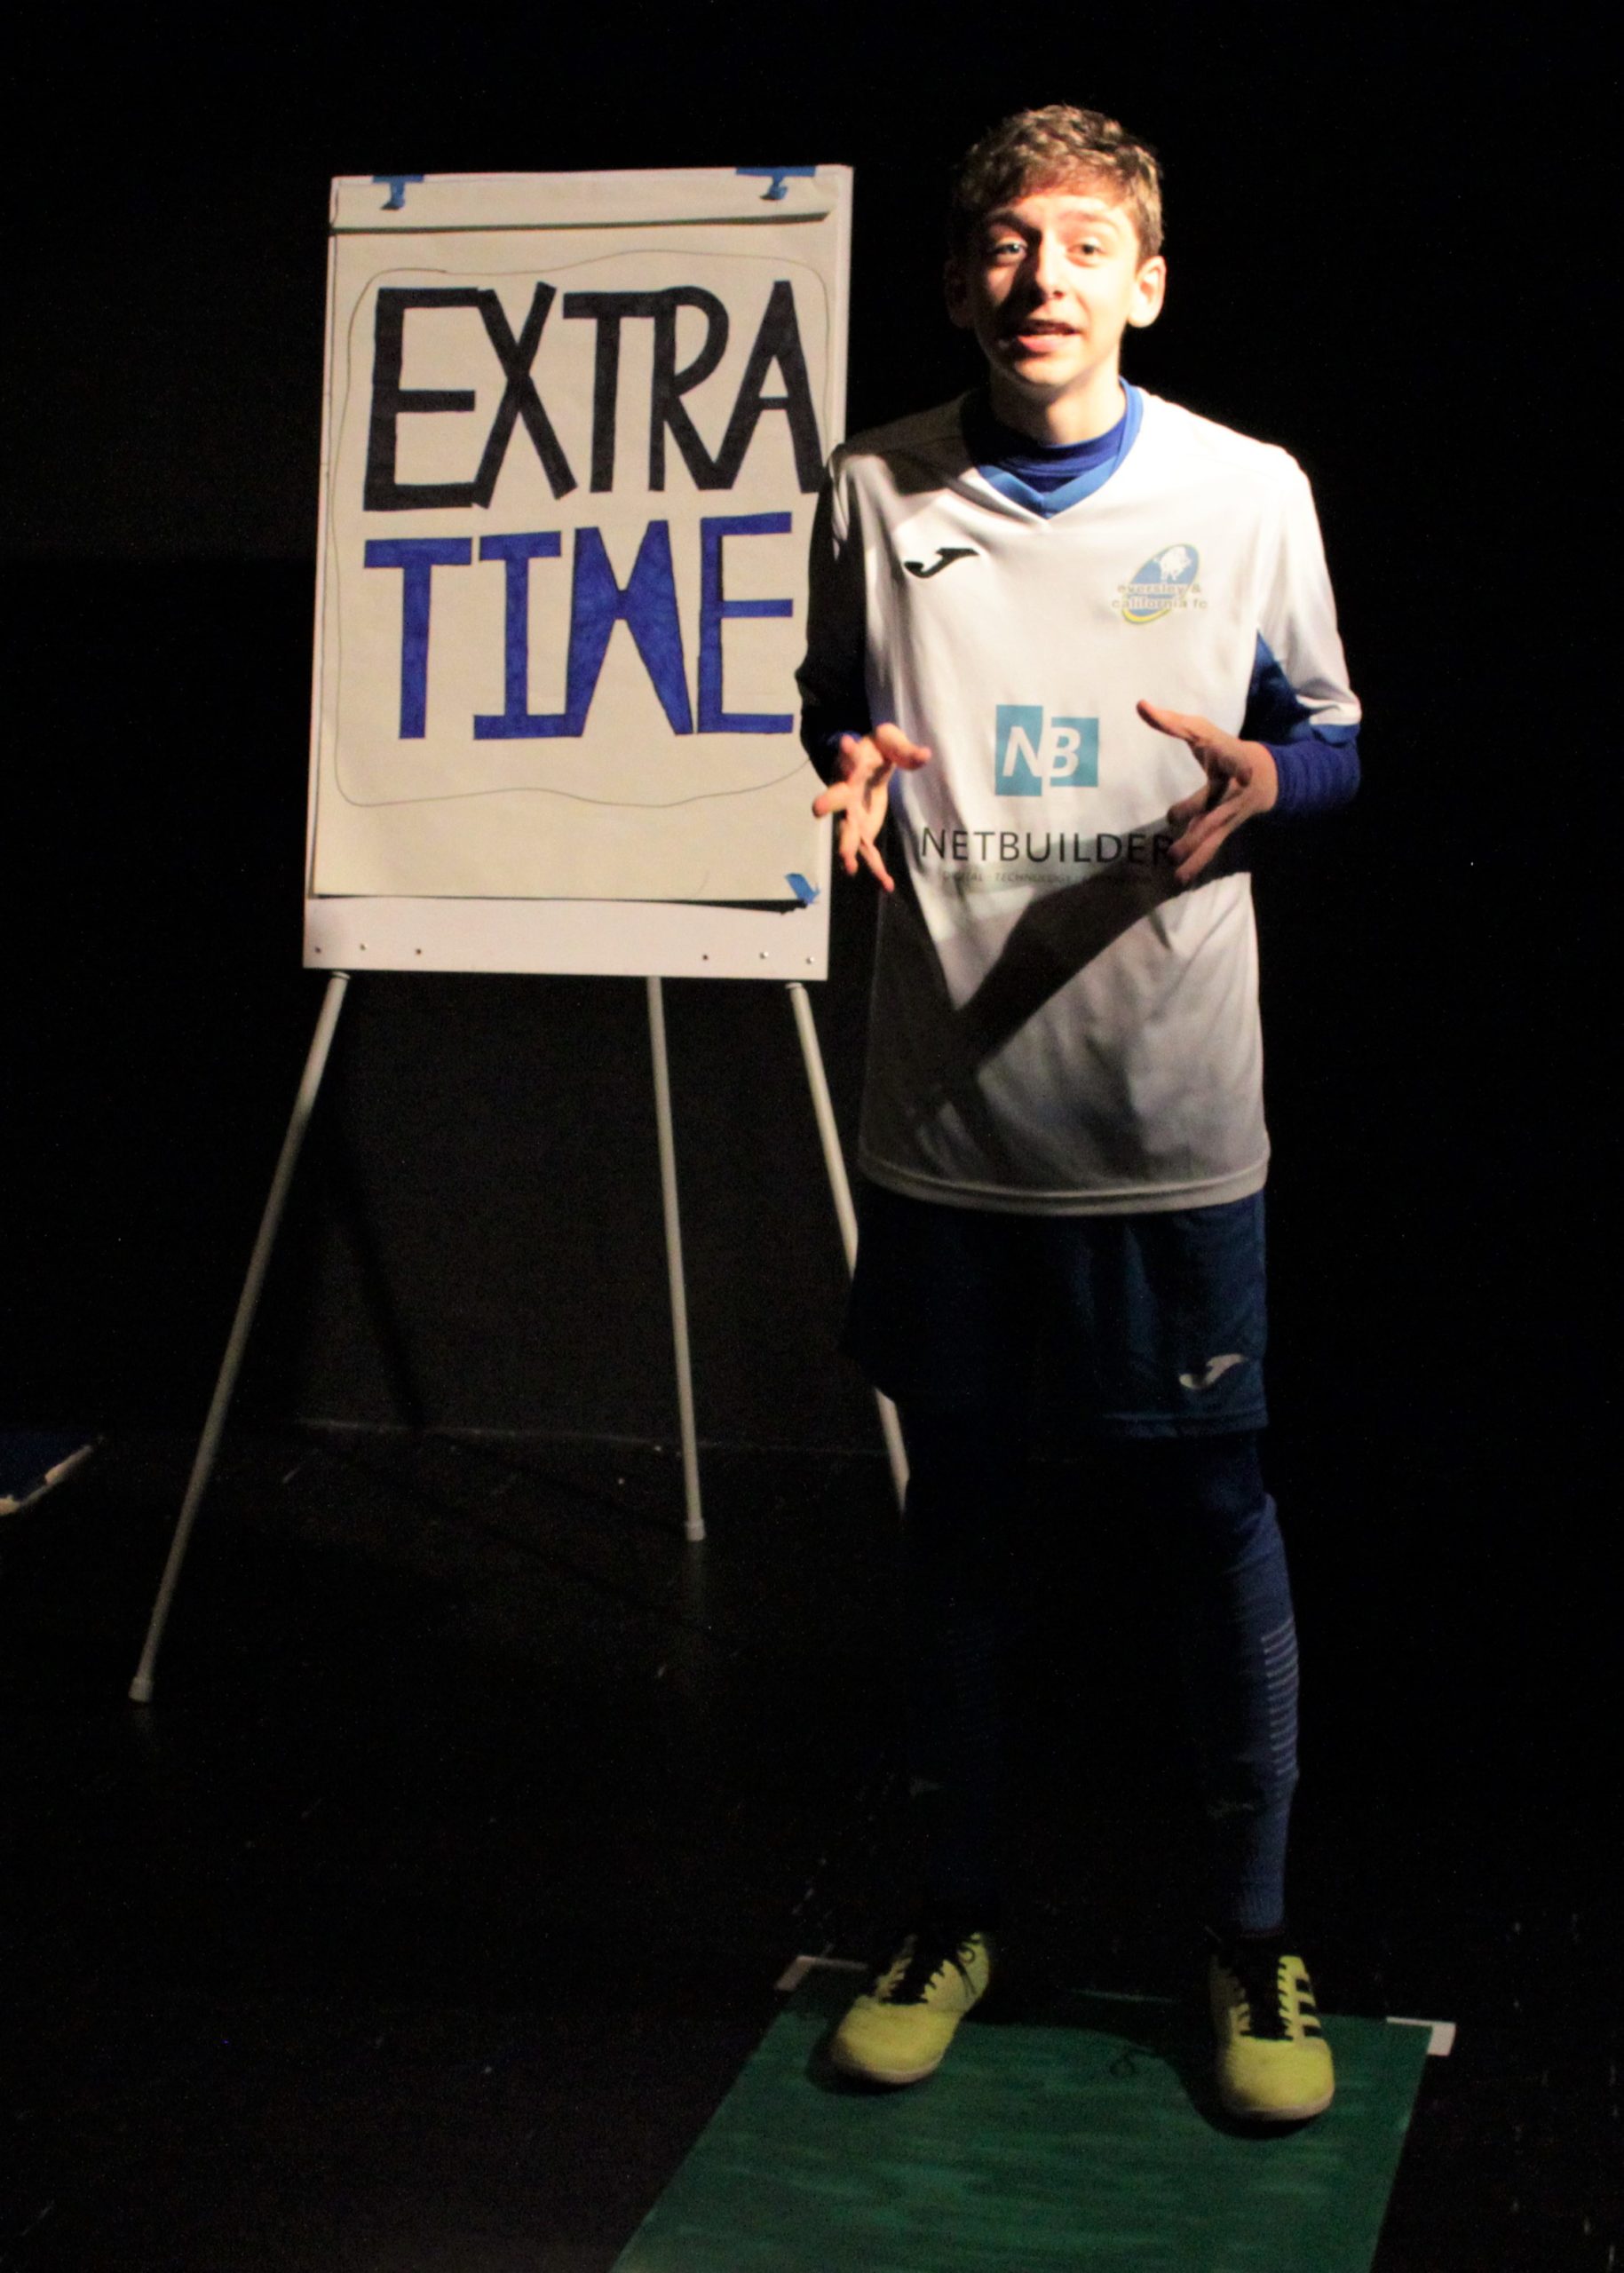 Boy stood in front of sign saying 'Extra time'